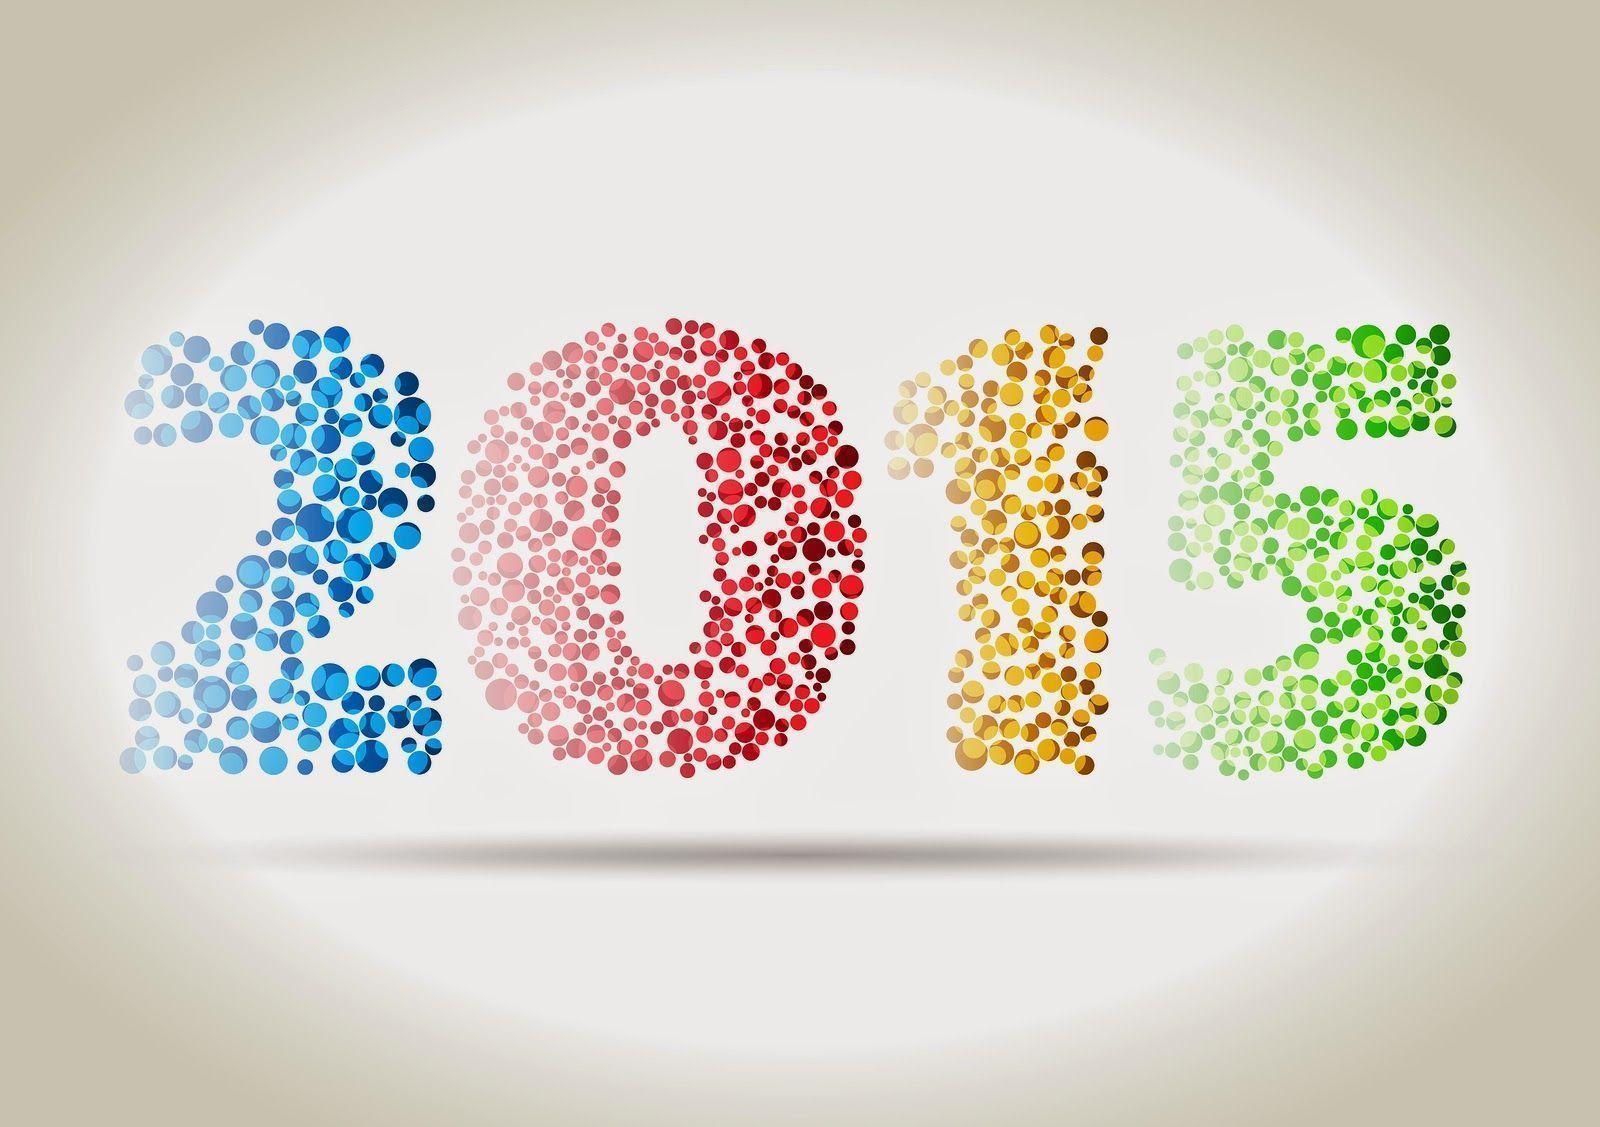 New Year 2015 Wallpaper & Picture Download